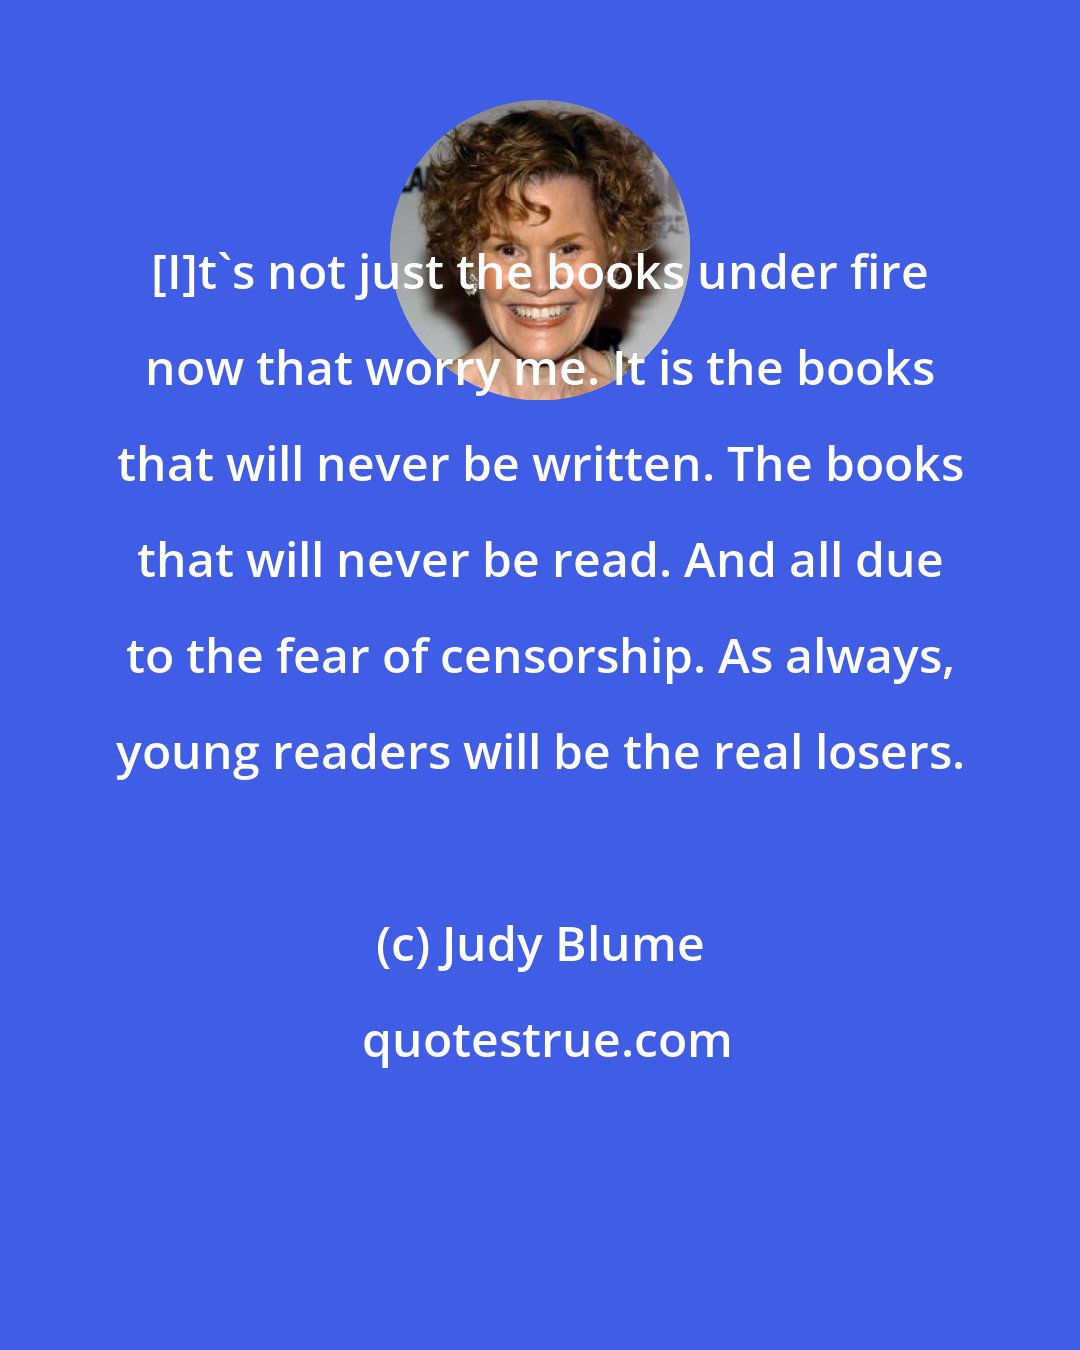 Judy Blume: [I]t's not just the books under fire now that worry me. It is the books that will never be written. The books that will never be read. And all due to the fear of censorship. As always, young readers will be the real losers.